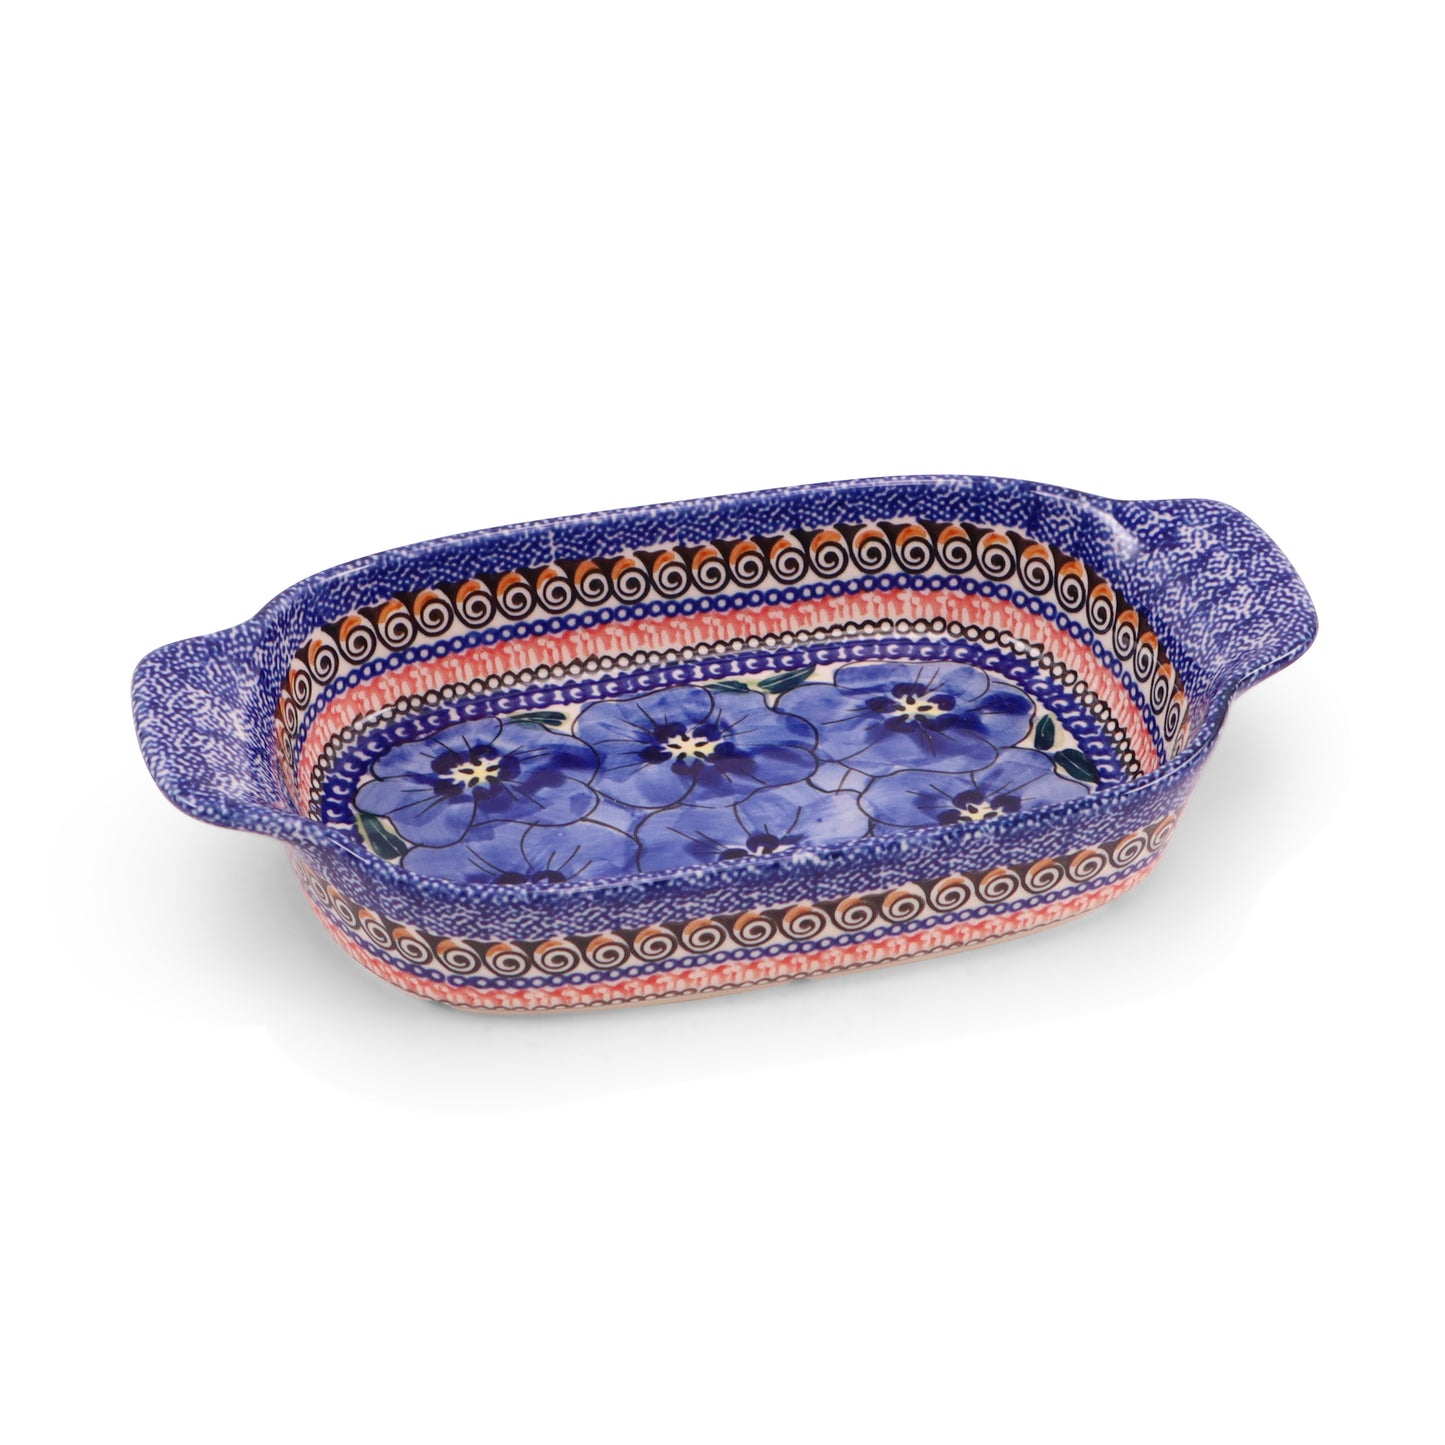 10"x5.5" Oval Serving Dish. Pattern: Very Violet